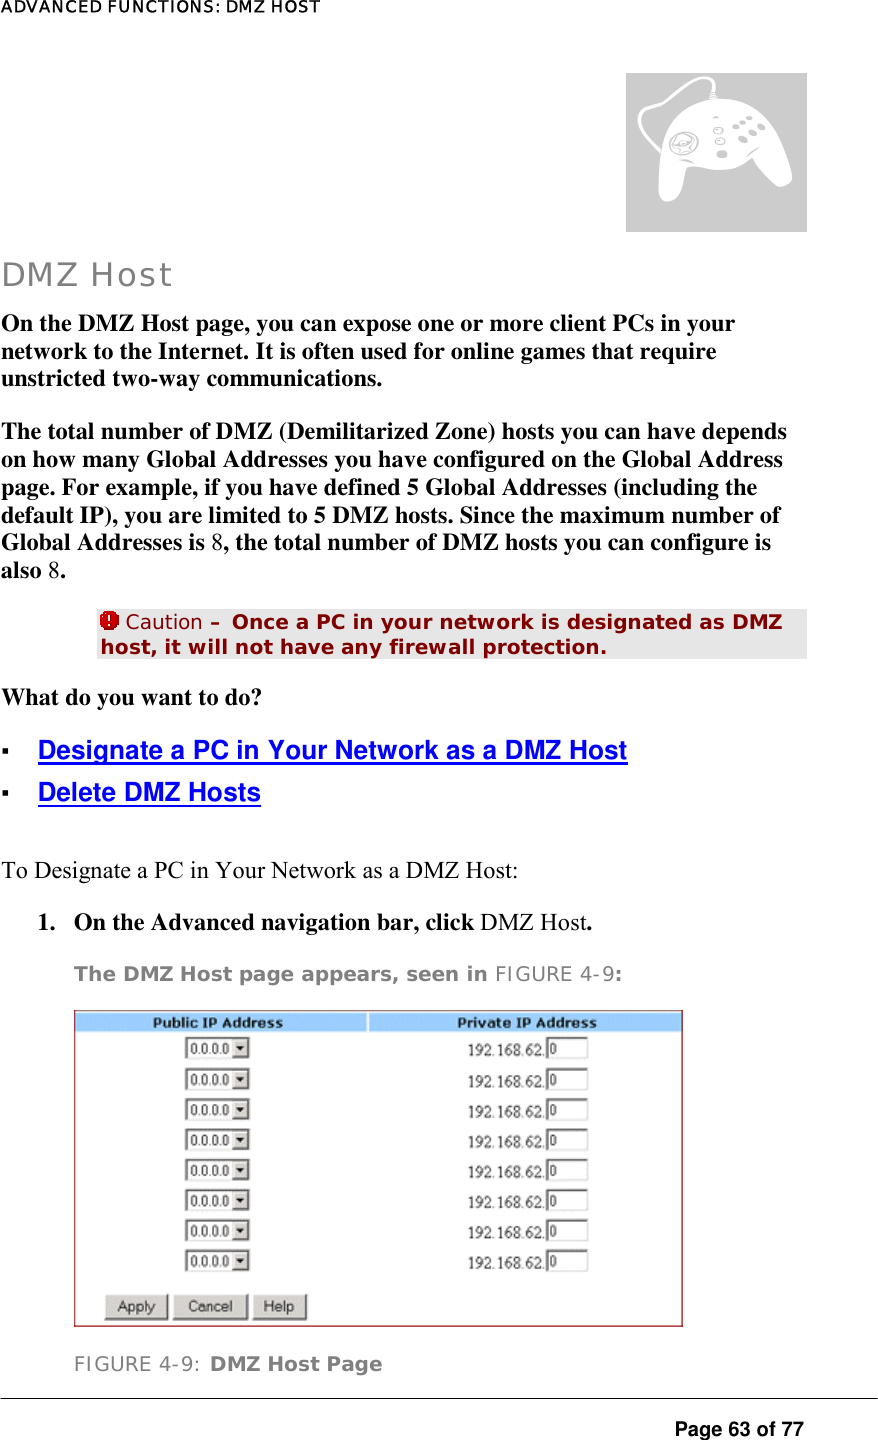 ADVANCED FUNCTIONS: DMZ HOST  Page 63 of 77 DMZ Host On the DMZ Host page, you can expose one or more client PCs in your network to the Internet. It is often used for online games that require unstricted two-way communications.  The total number of DMZ (Demilitarized Zone) hosts you can have depends on how many Global Addresses you have configured on the Global Address page. For example, if you have defined 5 Global Addresses (including the default IP), you are limited to 5 DMZ hosts. Since the maximum number of Global Addresses is 8, the total number of DMZ hosts you can configure is also 8.   Caution – Once a PC in your network is designated as DMZ host, it will not have any firewall protection.  What do you want to do?  ▪ Designate a PC in Your Network as a DMZ Host ▪ Delete DMZ Hosts To Designate a PC in Your Network as a DMZ Host:  1.  On the Advanced navigation bar, click DMZ Host.  The DMZ Host page appears, seen in FIGURE 4-9:   FIGURE 4-9: DMZ Host Page ¦ 